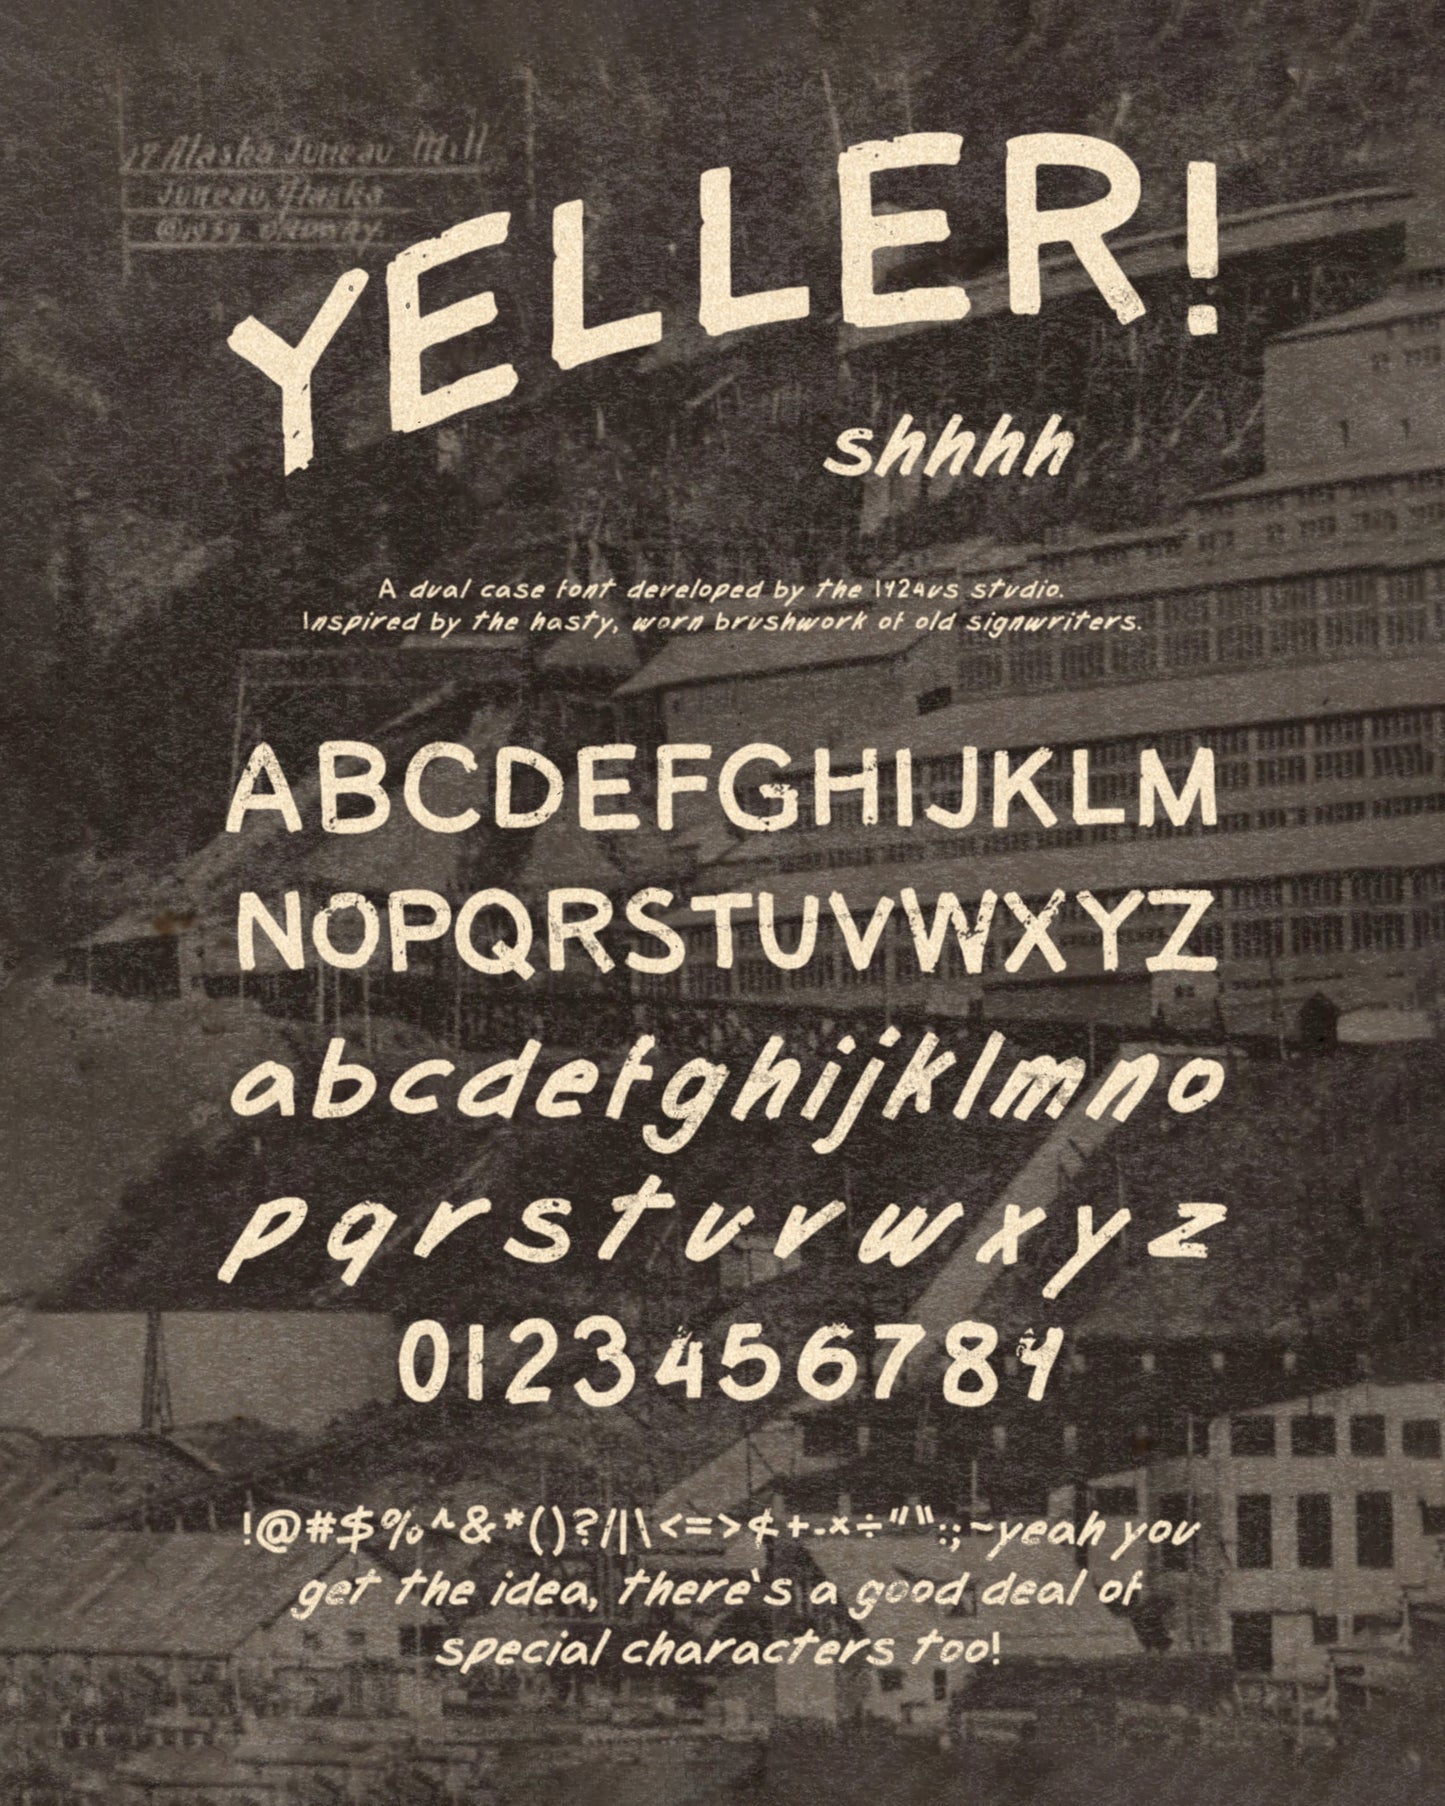 Yeller Font by 1924us